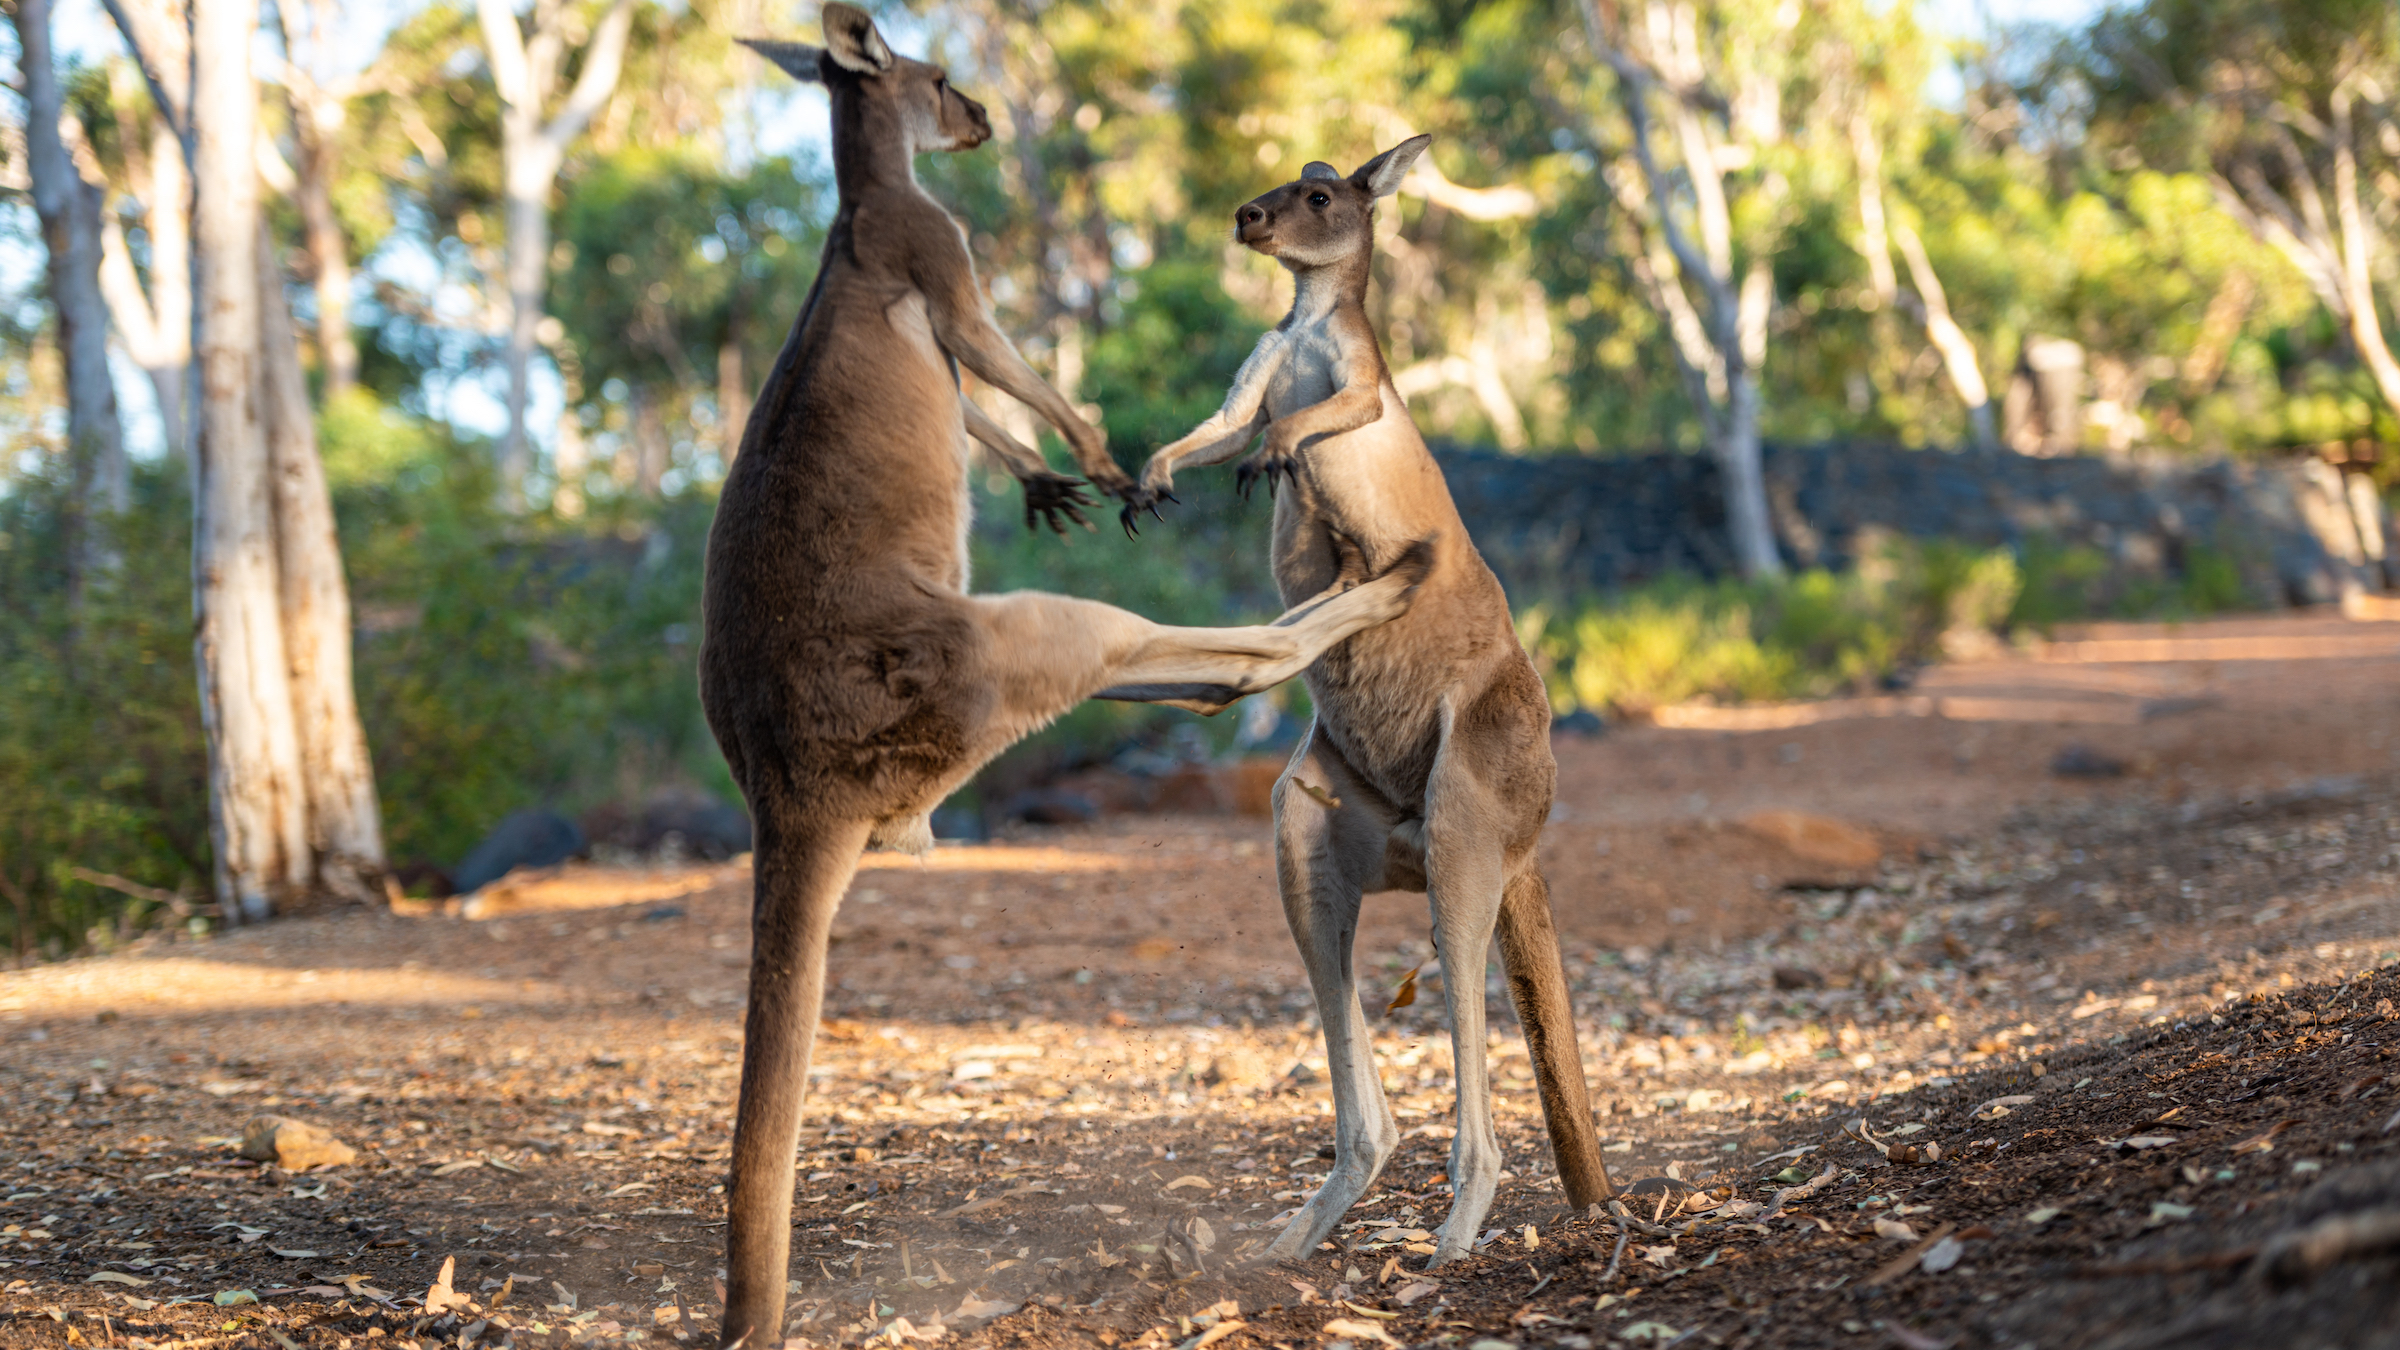 A western gray kangaroo (Macropus fuliginosus) kickboxing while standing on its tail in John Forest National Park in Perth, Western Australia.